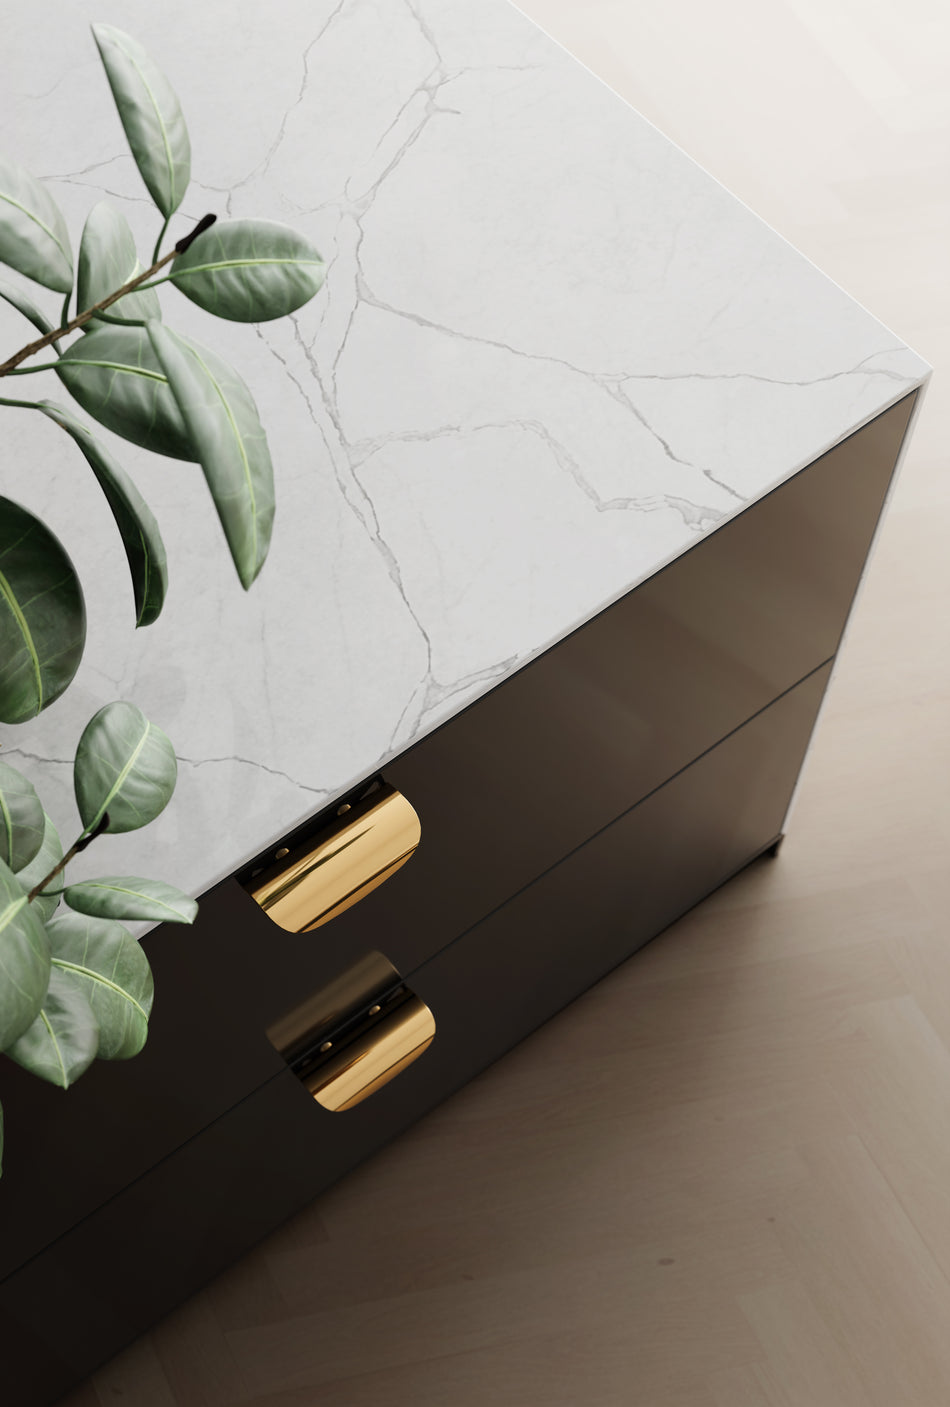 TWO LUXURY GOLD DRAWER HANDLE ATLAS BY PULLCAST JEWELRY HARDWARE